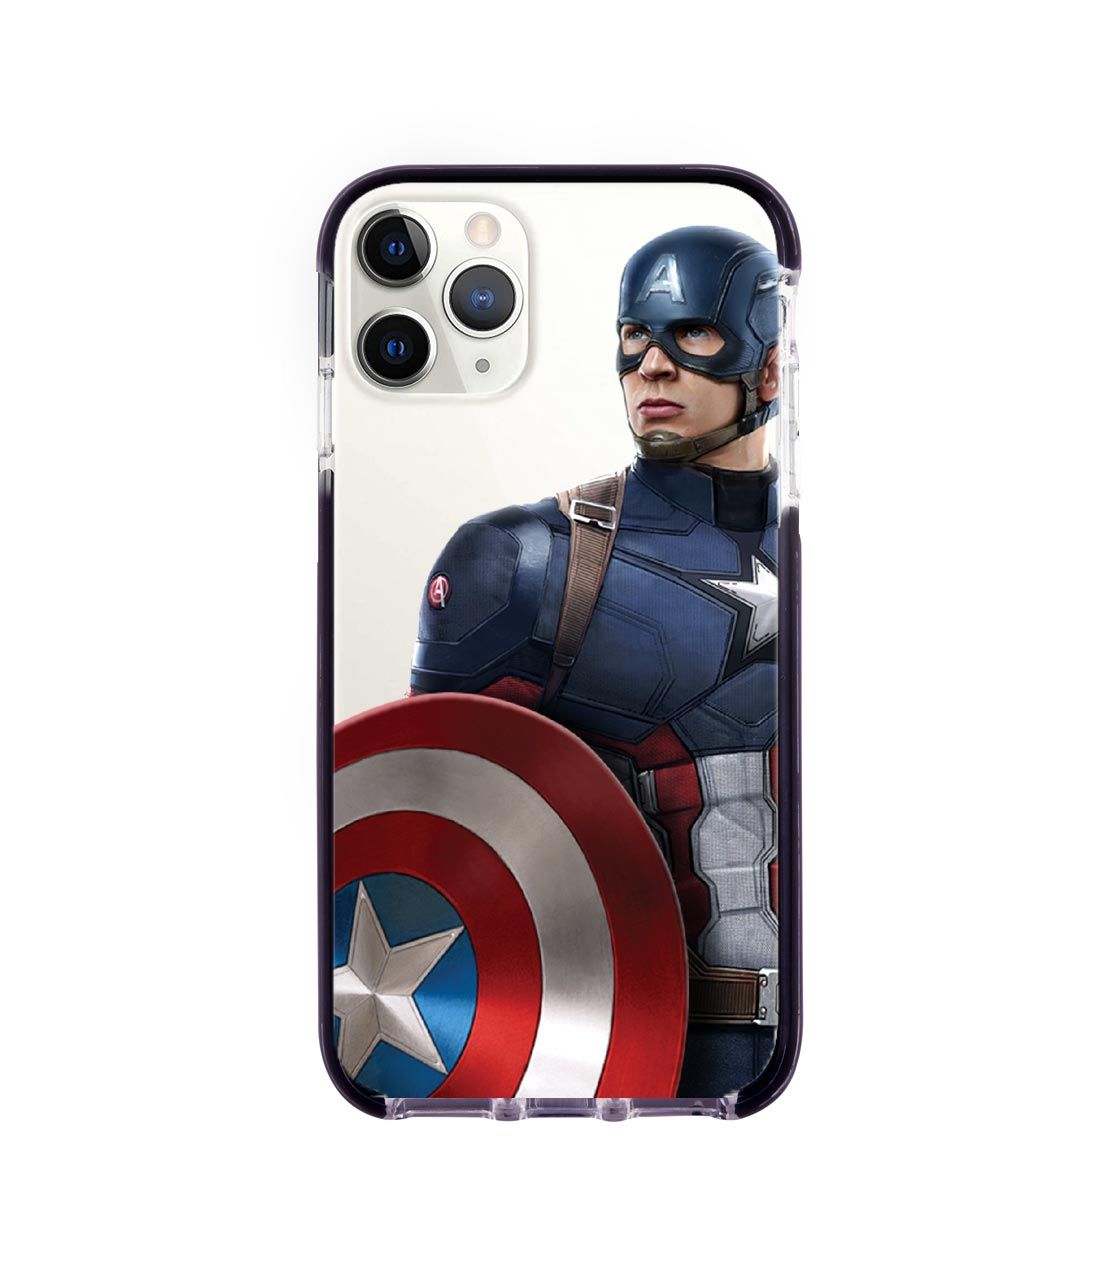 Team Blue Captain - Extreme Phone Case for iPhone 11 Pro